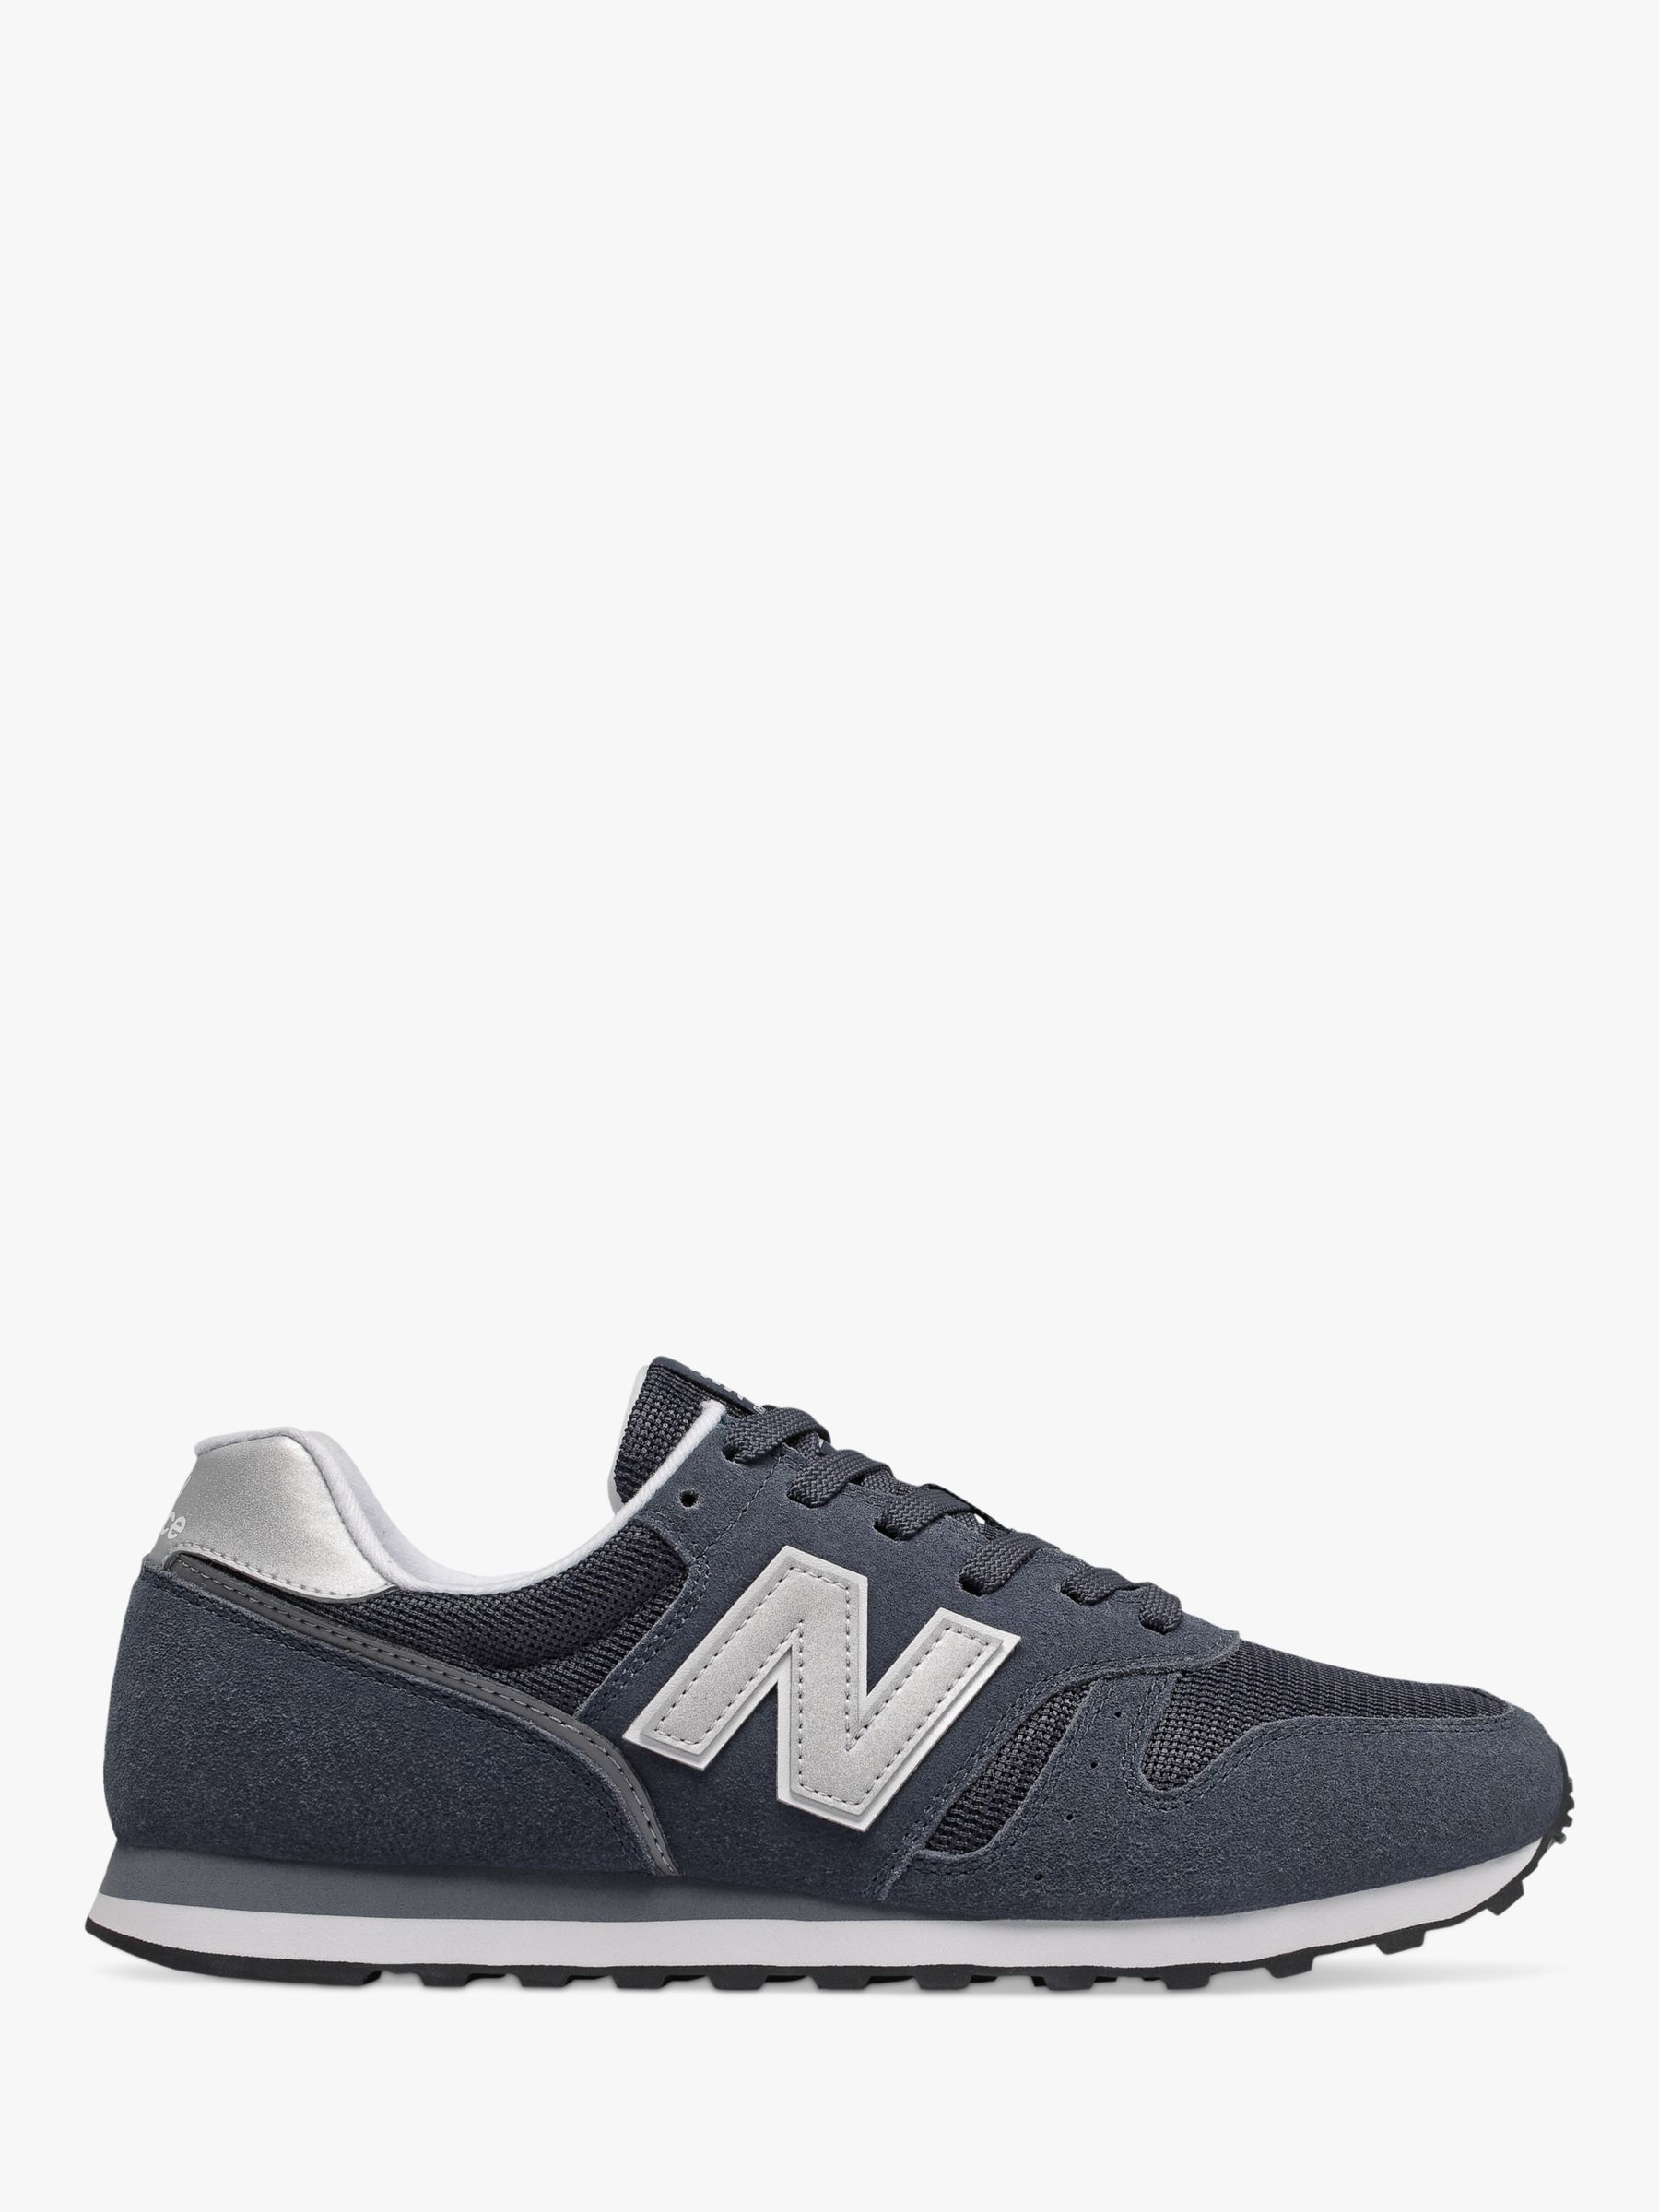 New Balance 373 Suede Trainers, Navy at John Lewis & Partners